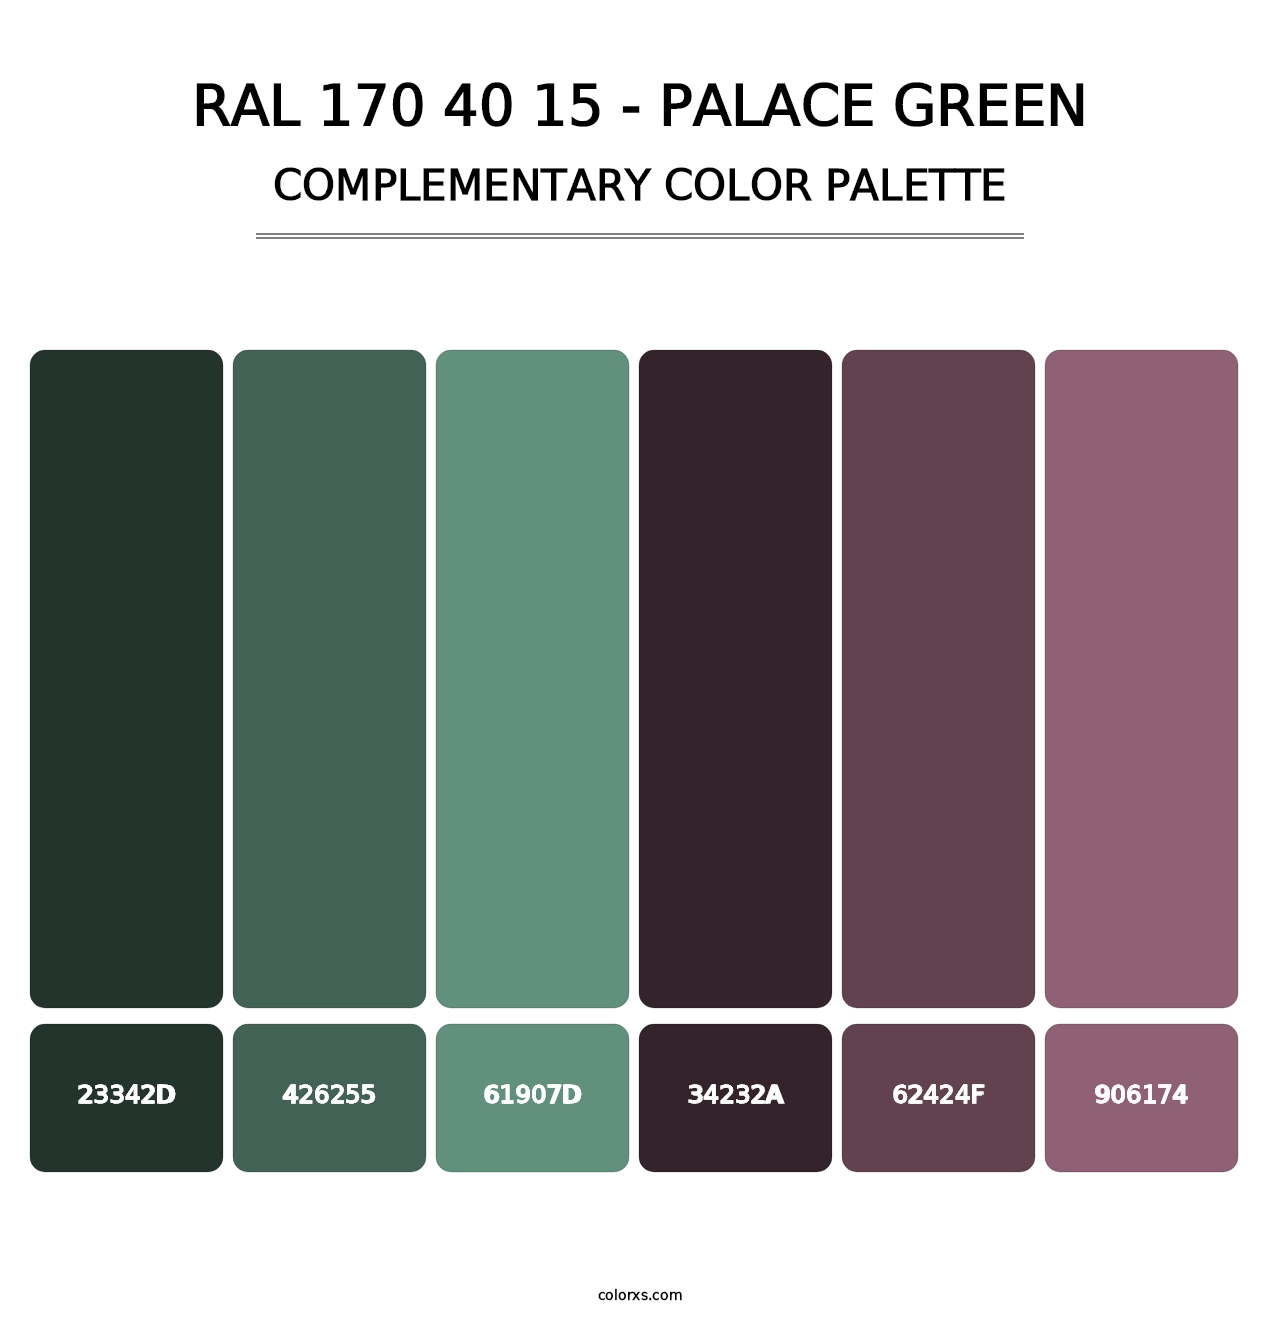 RAL 170 40 15 - Palace Green - Complementary Color Palette